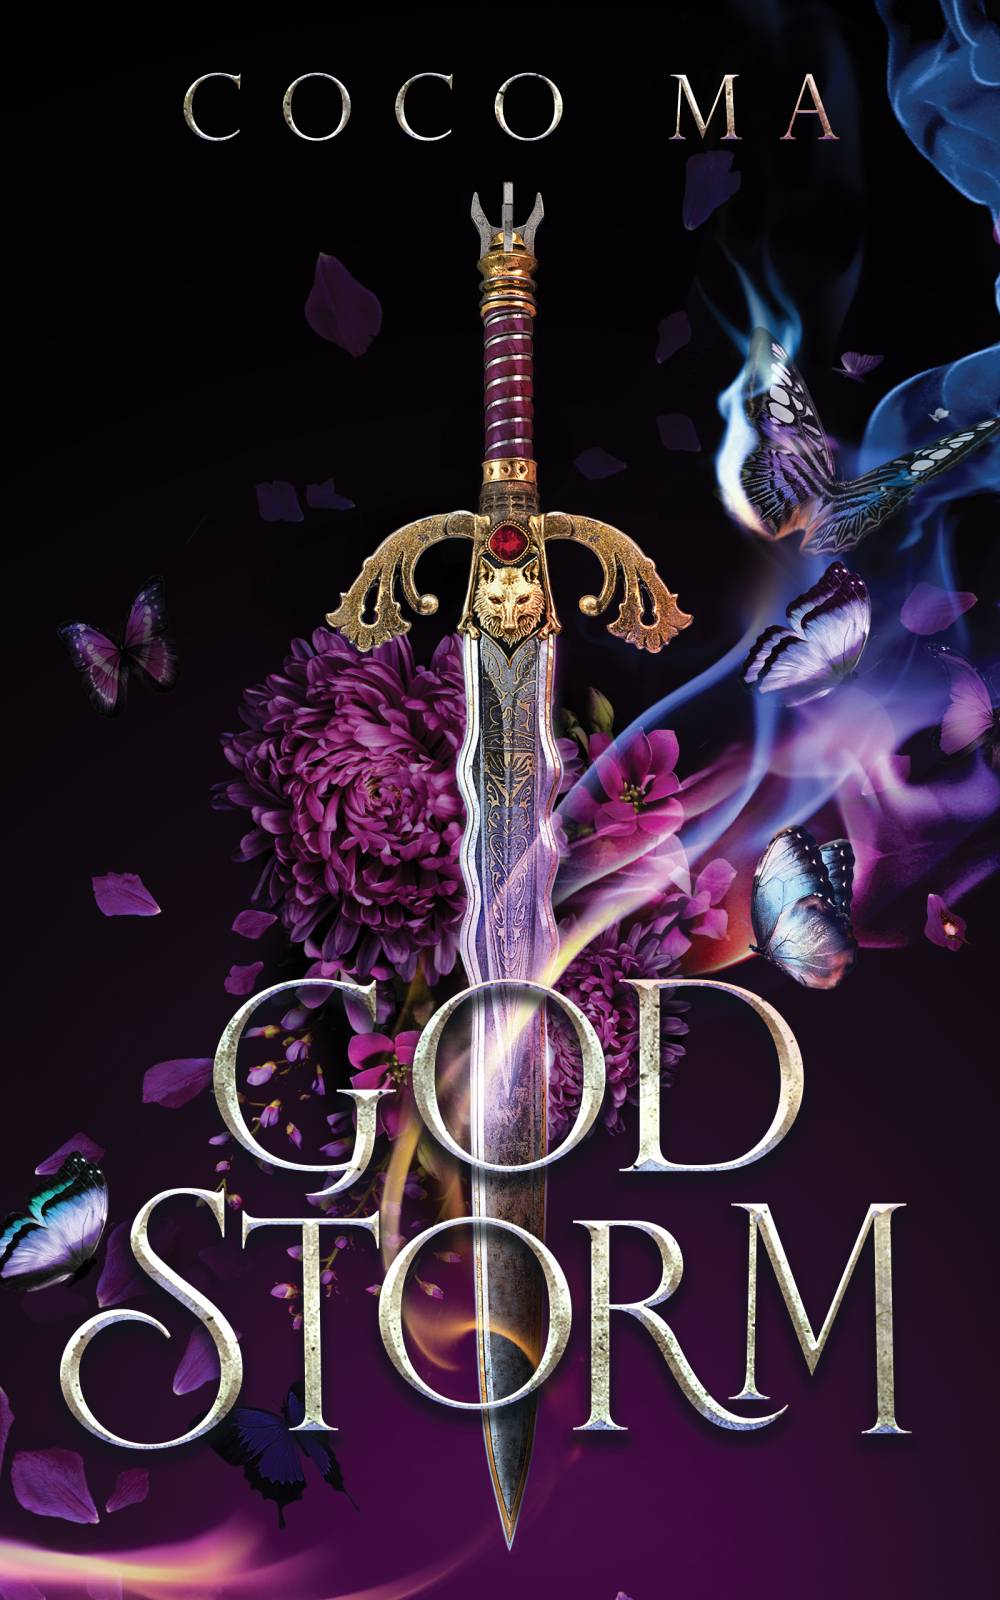 'God Storm' by Coco Ma